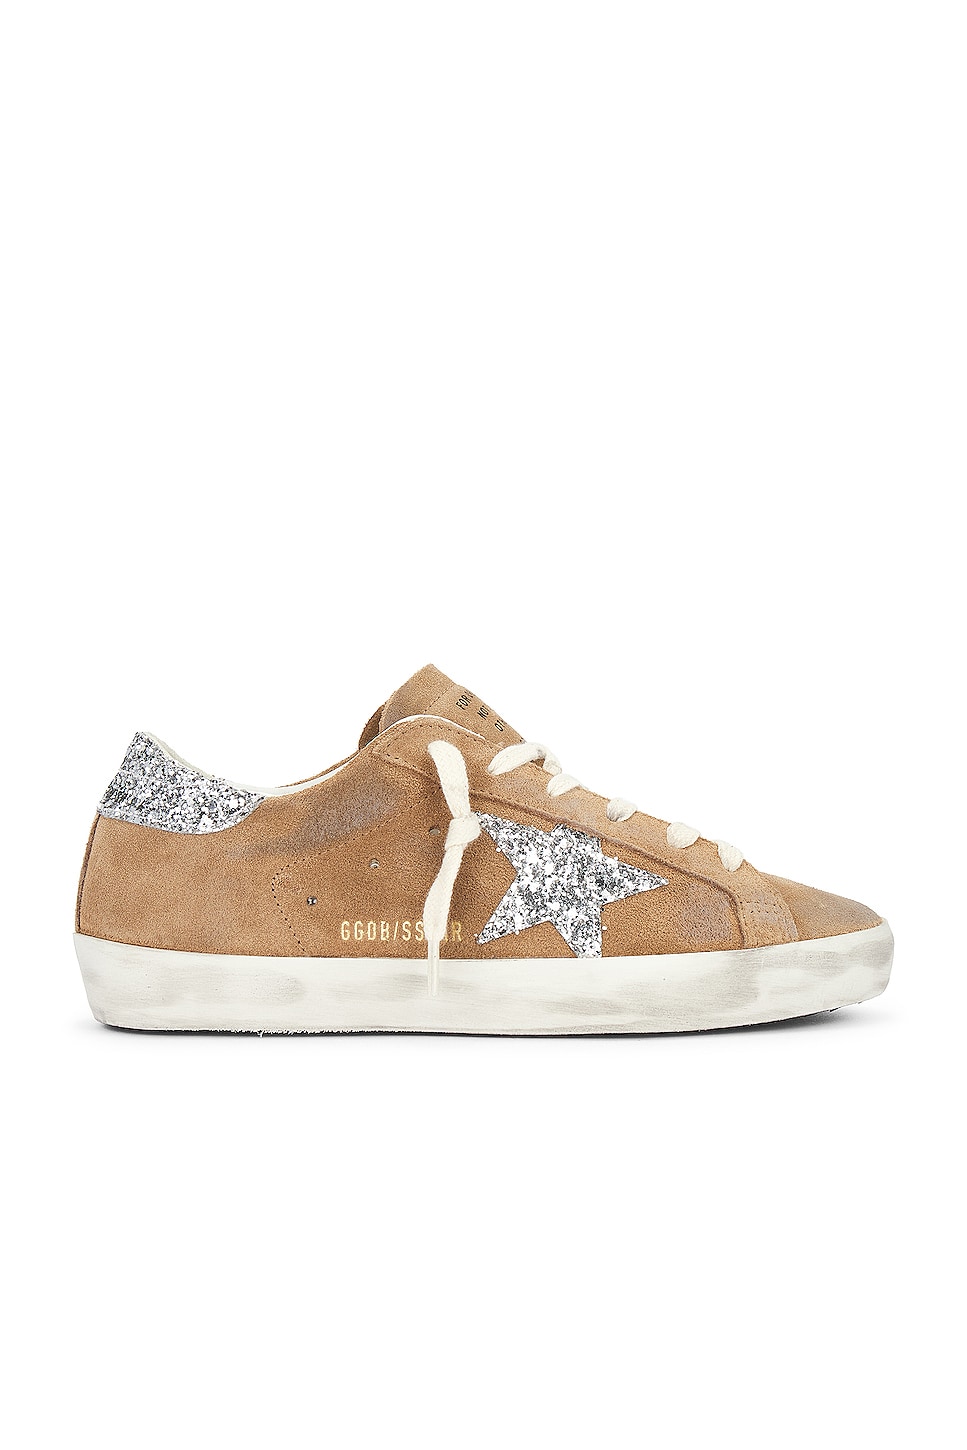 Image 1 of Golden Goose Super Star Suede Sneaker in Tabacco & Silver